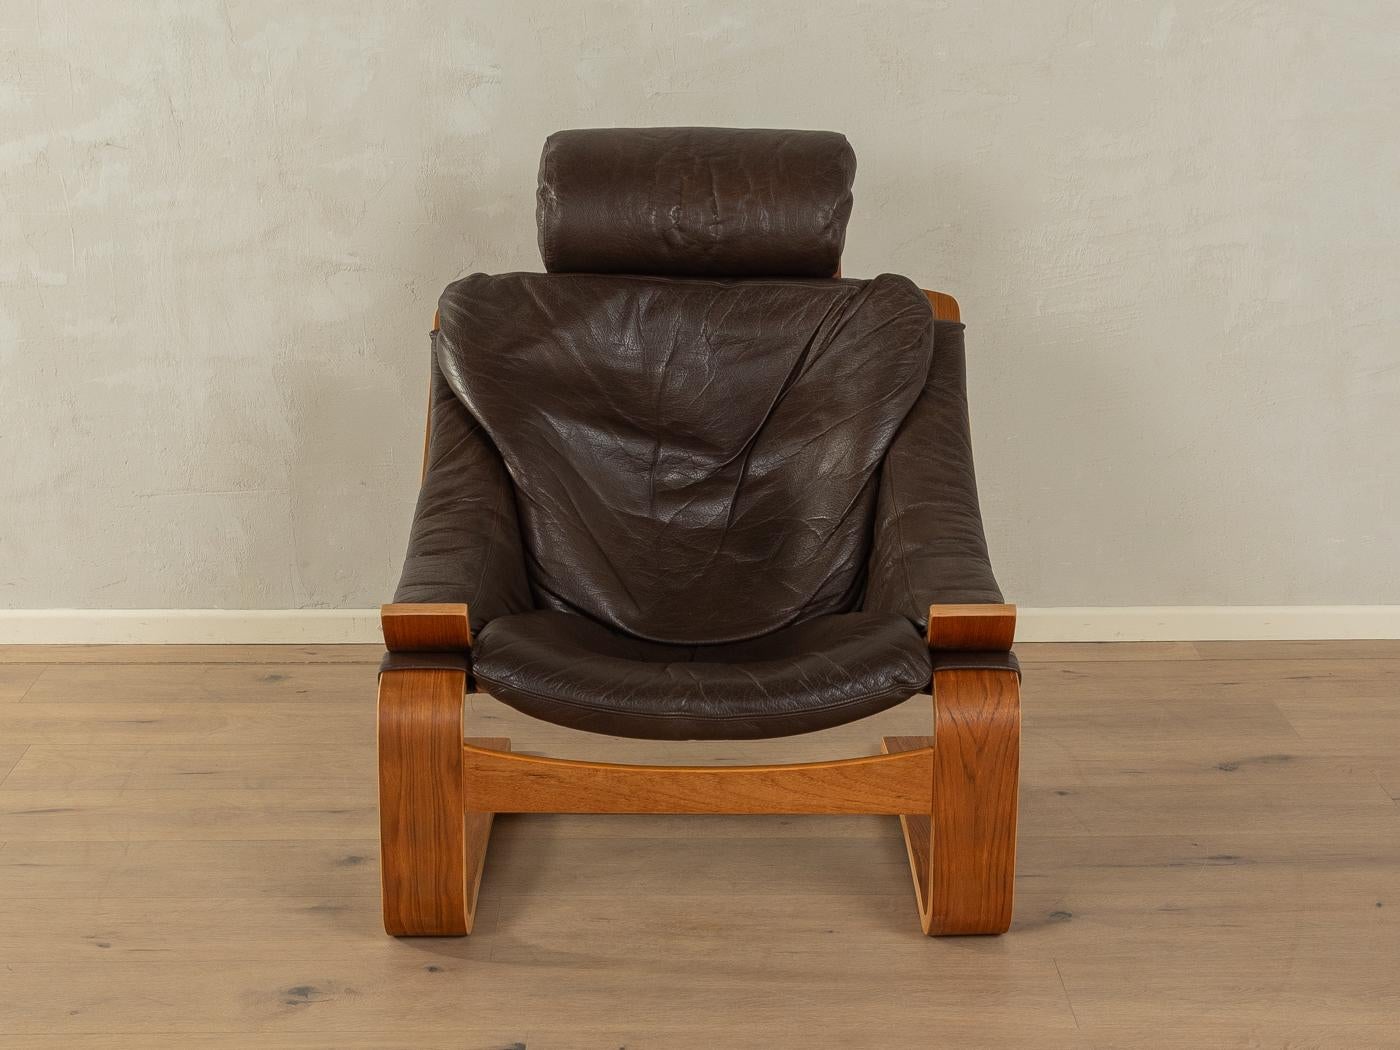 KROKEN armchair with footstool by Ake Fribytter for NELO from the 1970s. High-quality solid wood frame made of oak bentwood  in teak veneer with the high-quality original cover made of dark brown leather.
Quality Features:

    accomplished design: